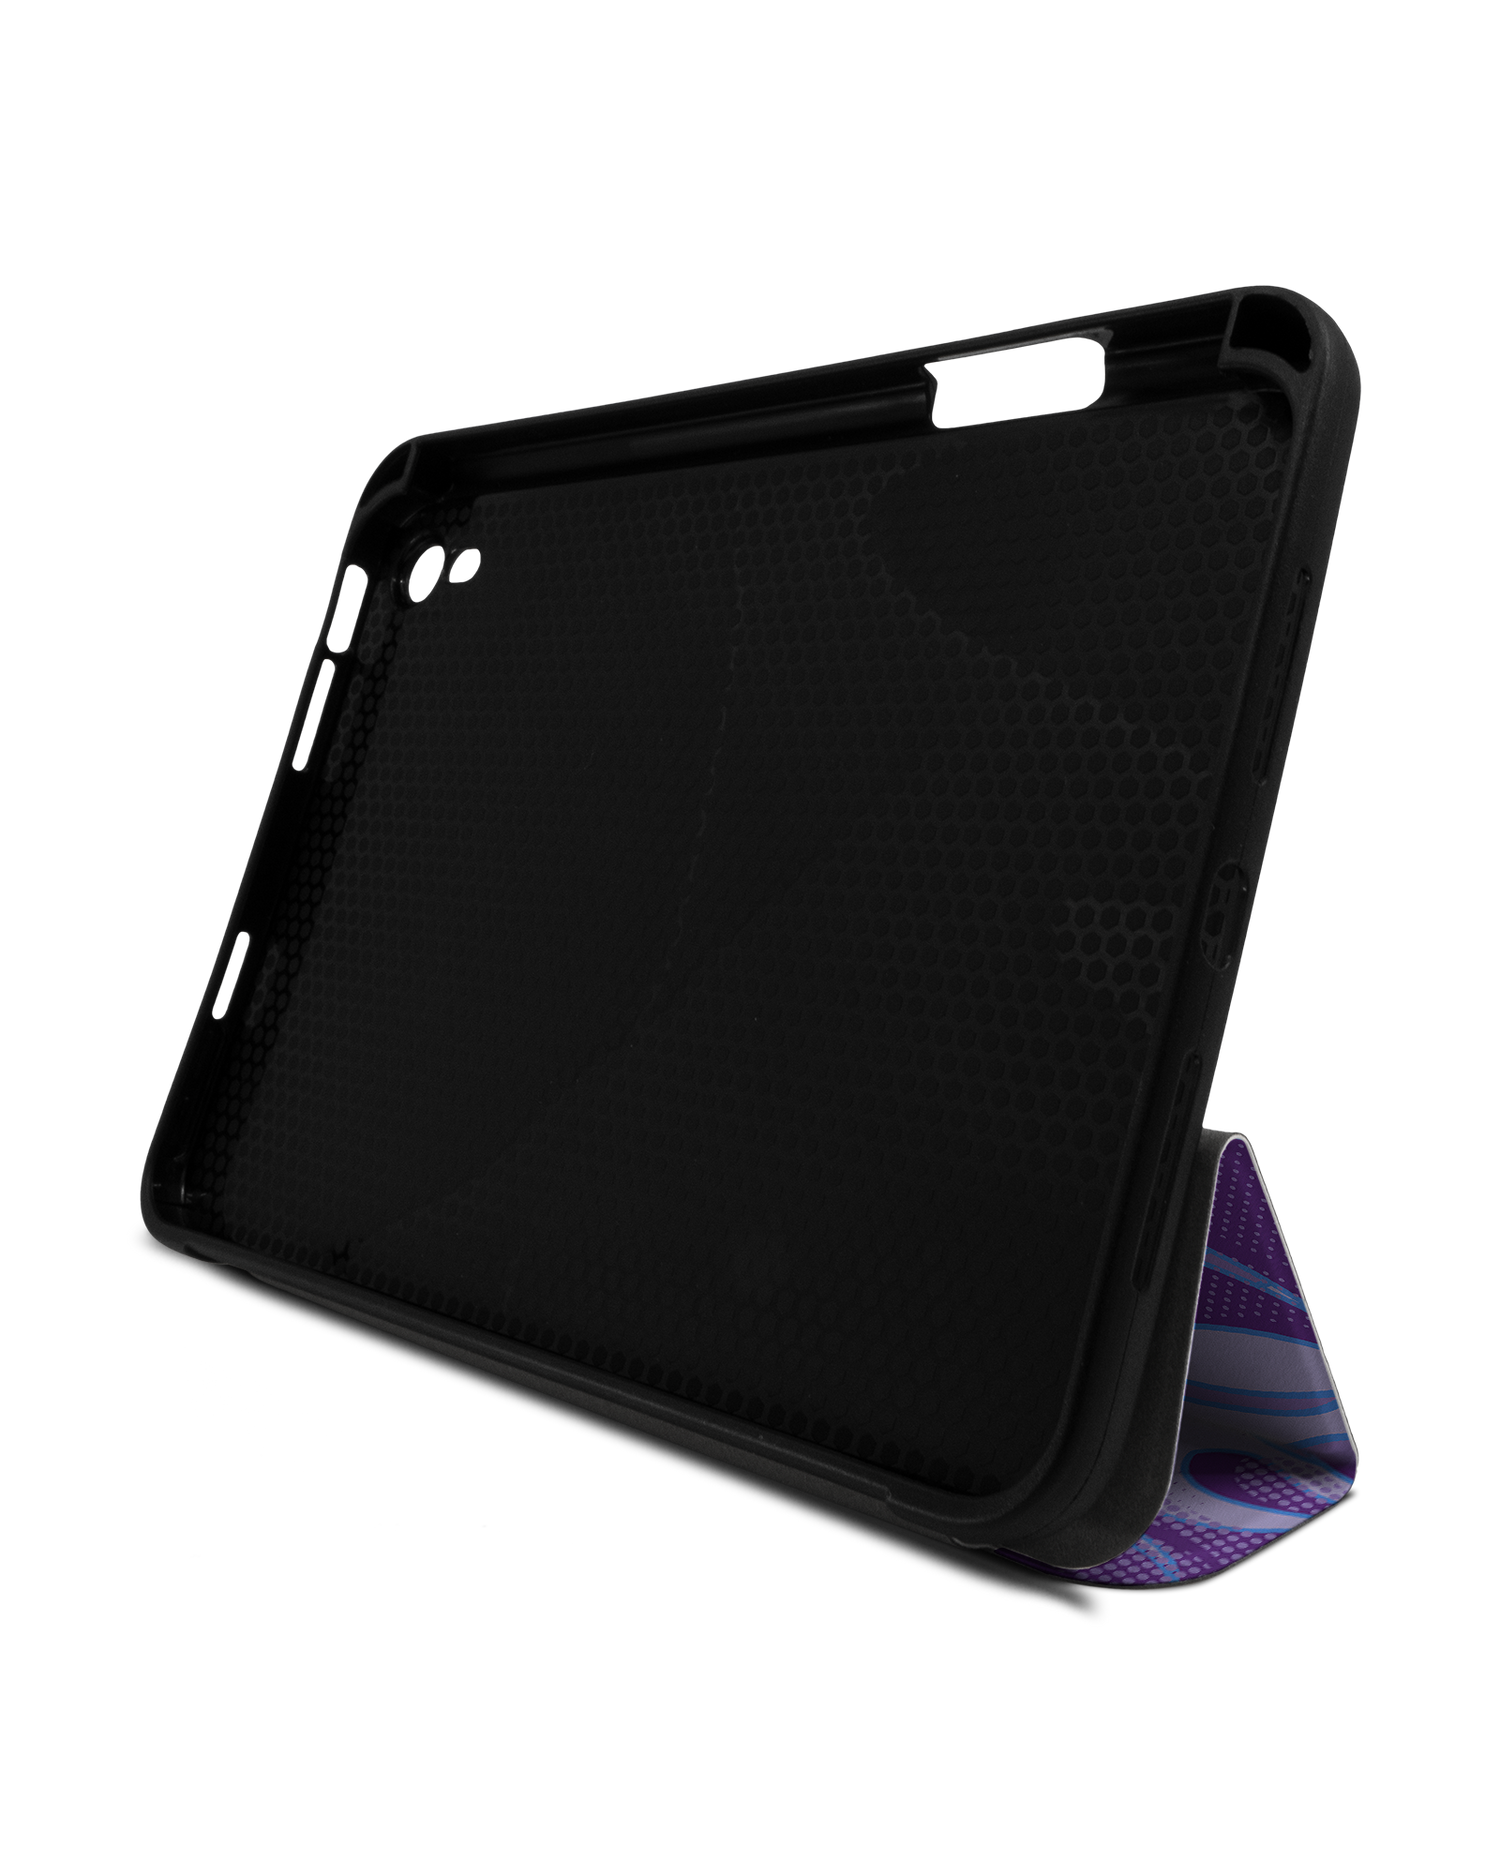 Purple Flames iPad Case with Pencil Holder Apple iPad mini 6 (2021): Set up in landscape format (front view)